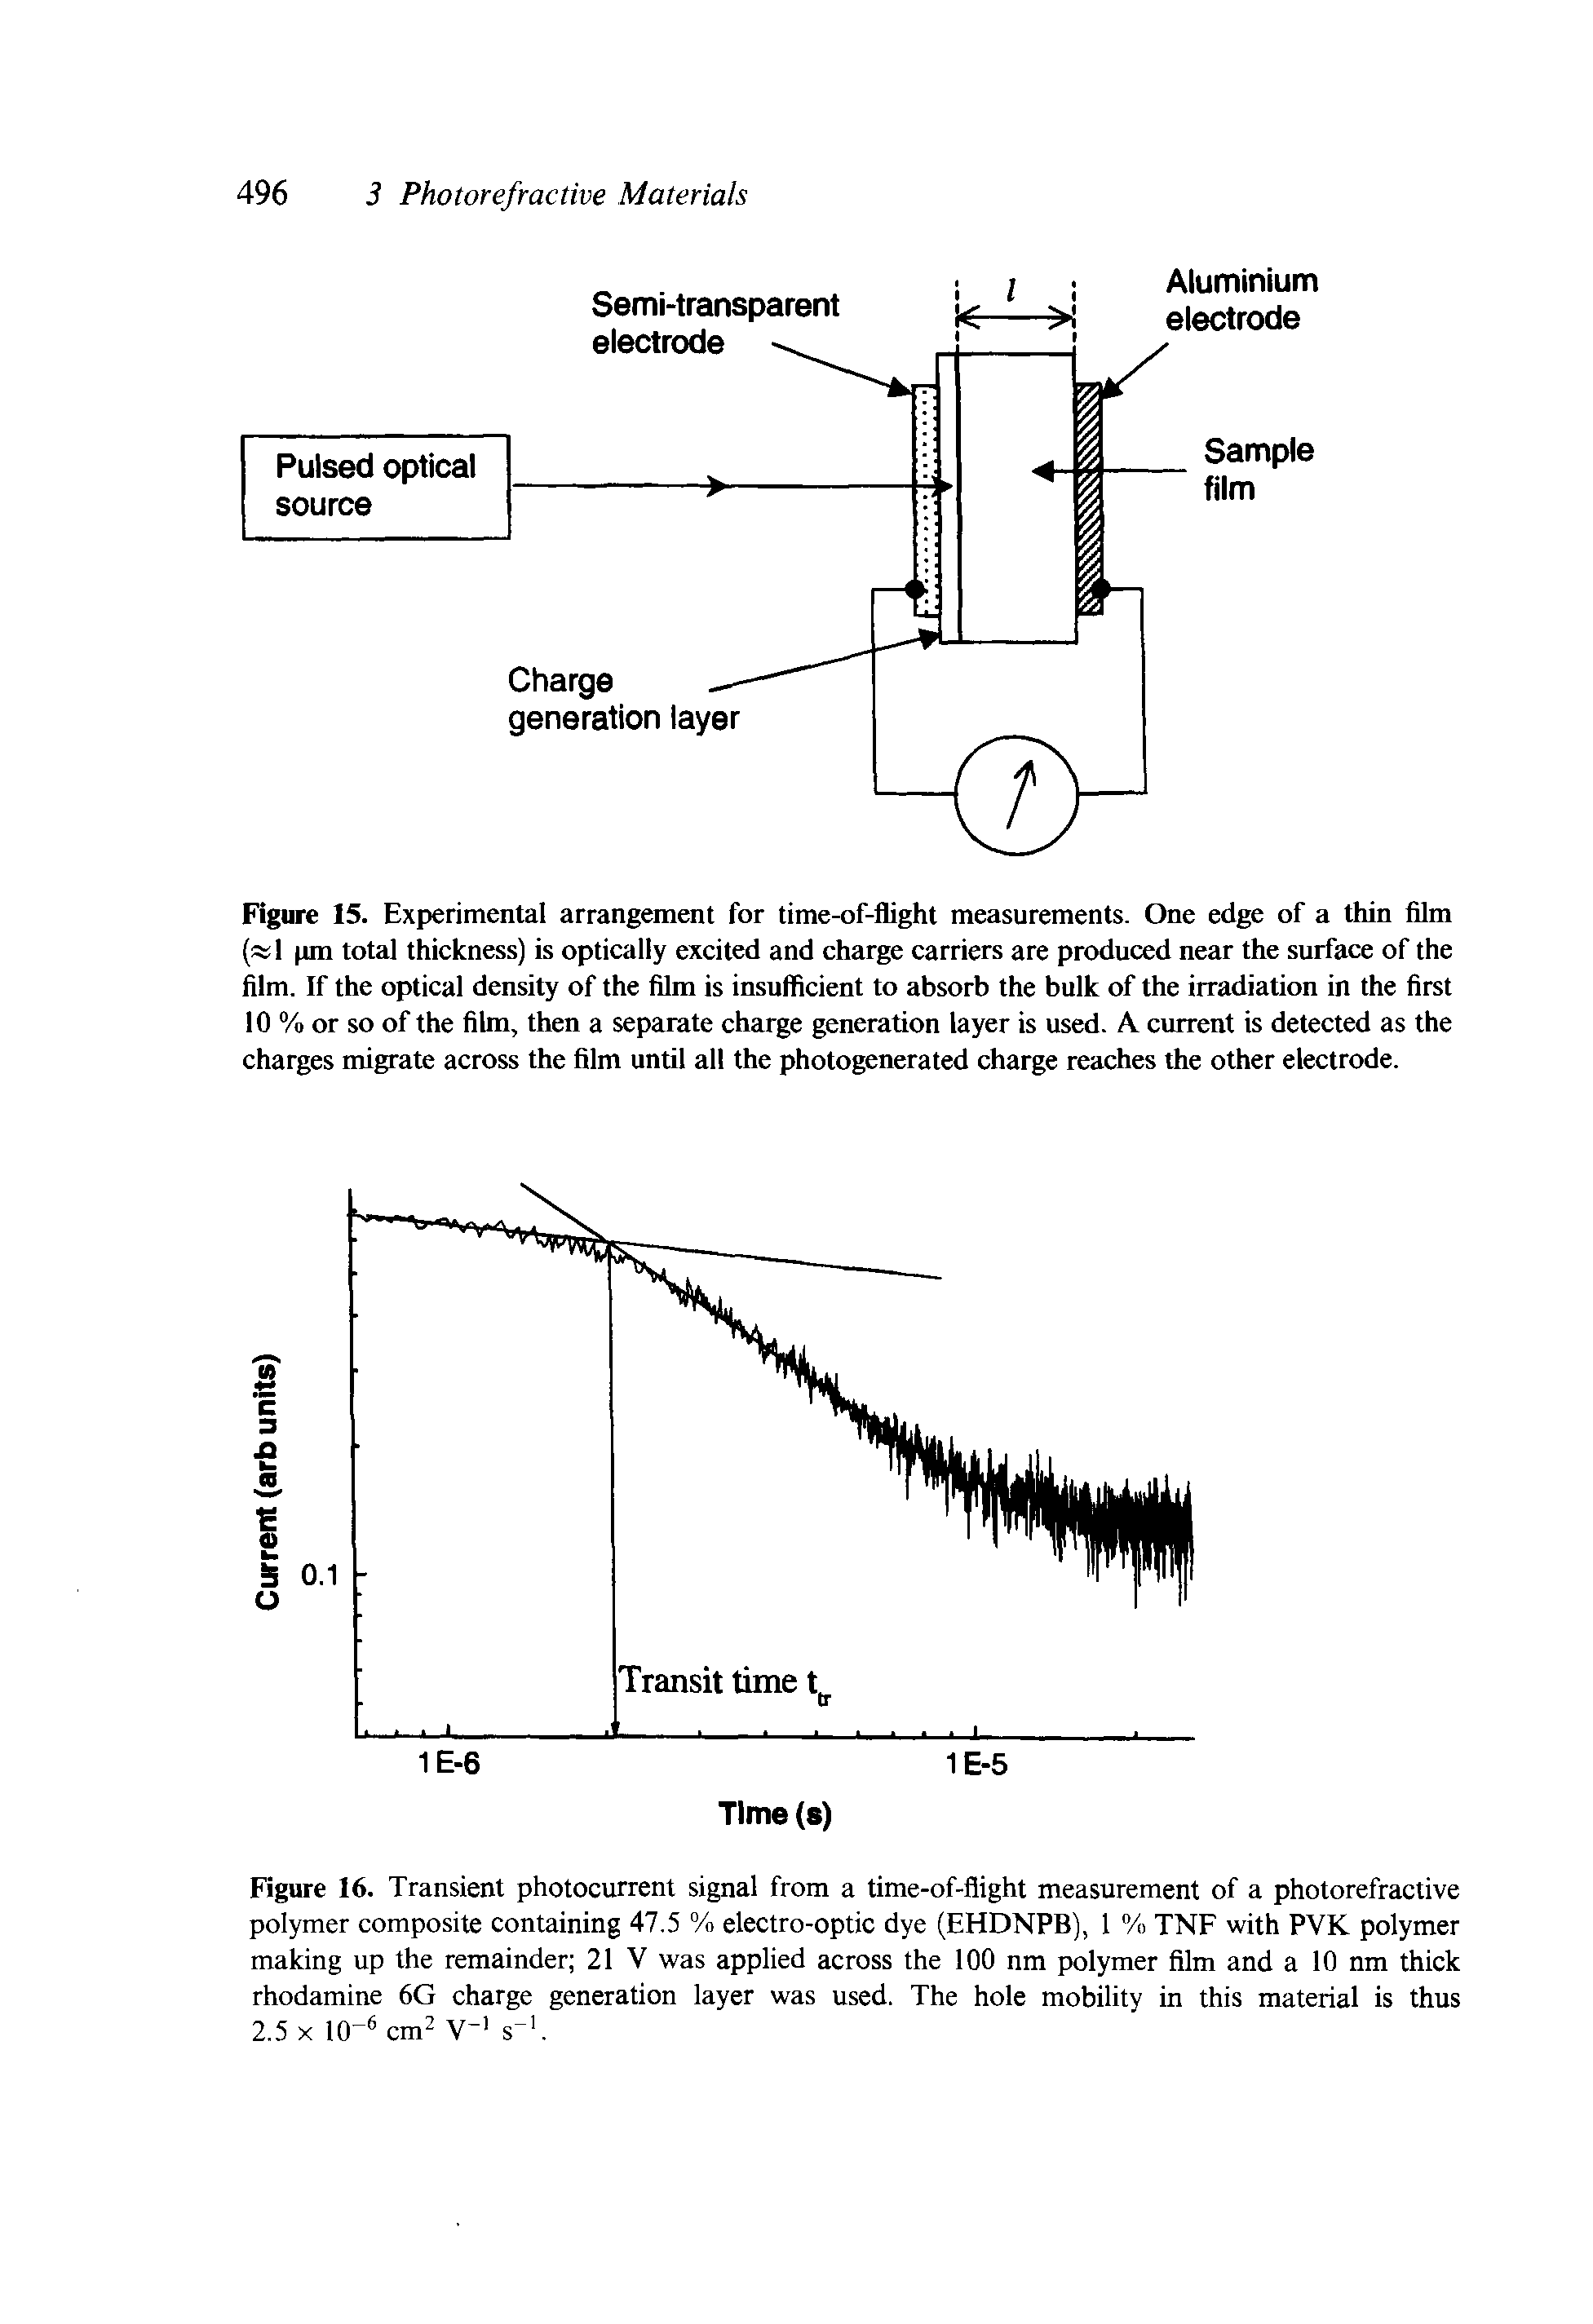 Figure 16. Transient photocurrent signal from a time-of-flight measurement of a photorefractive polymer composite containing 47.5 % electro-optic dye (EHDNPB), 1 % TNF with PVK polymer making up the remainder 21 V was applied across the 100 nm polymer film and a 10 nm thick rhodamine 6G charge generation layer was used. The hole mobility in this material is thus...